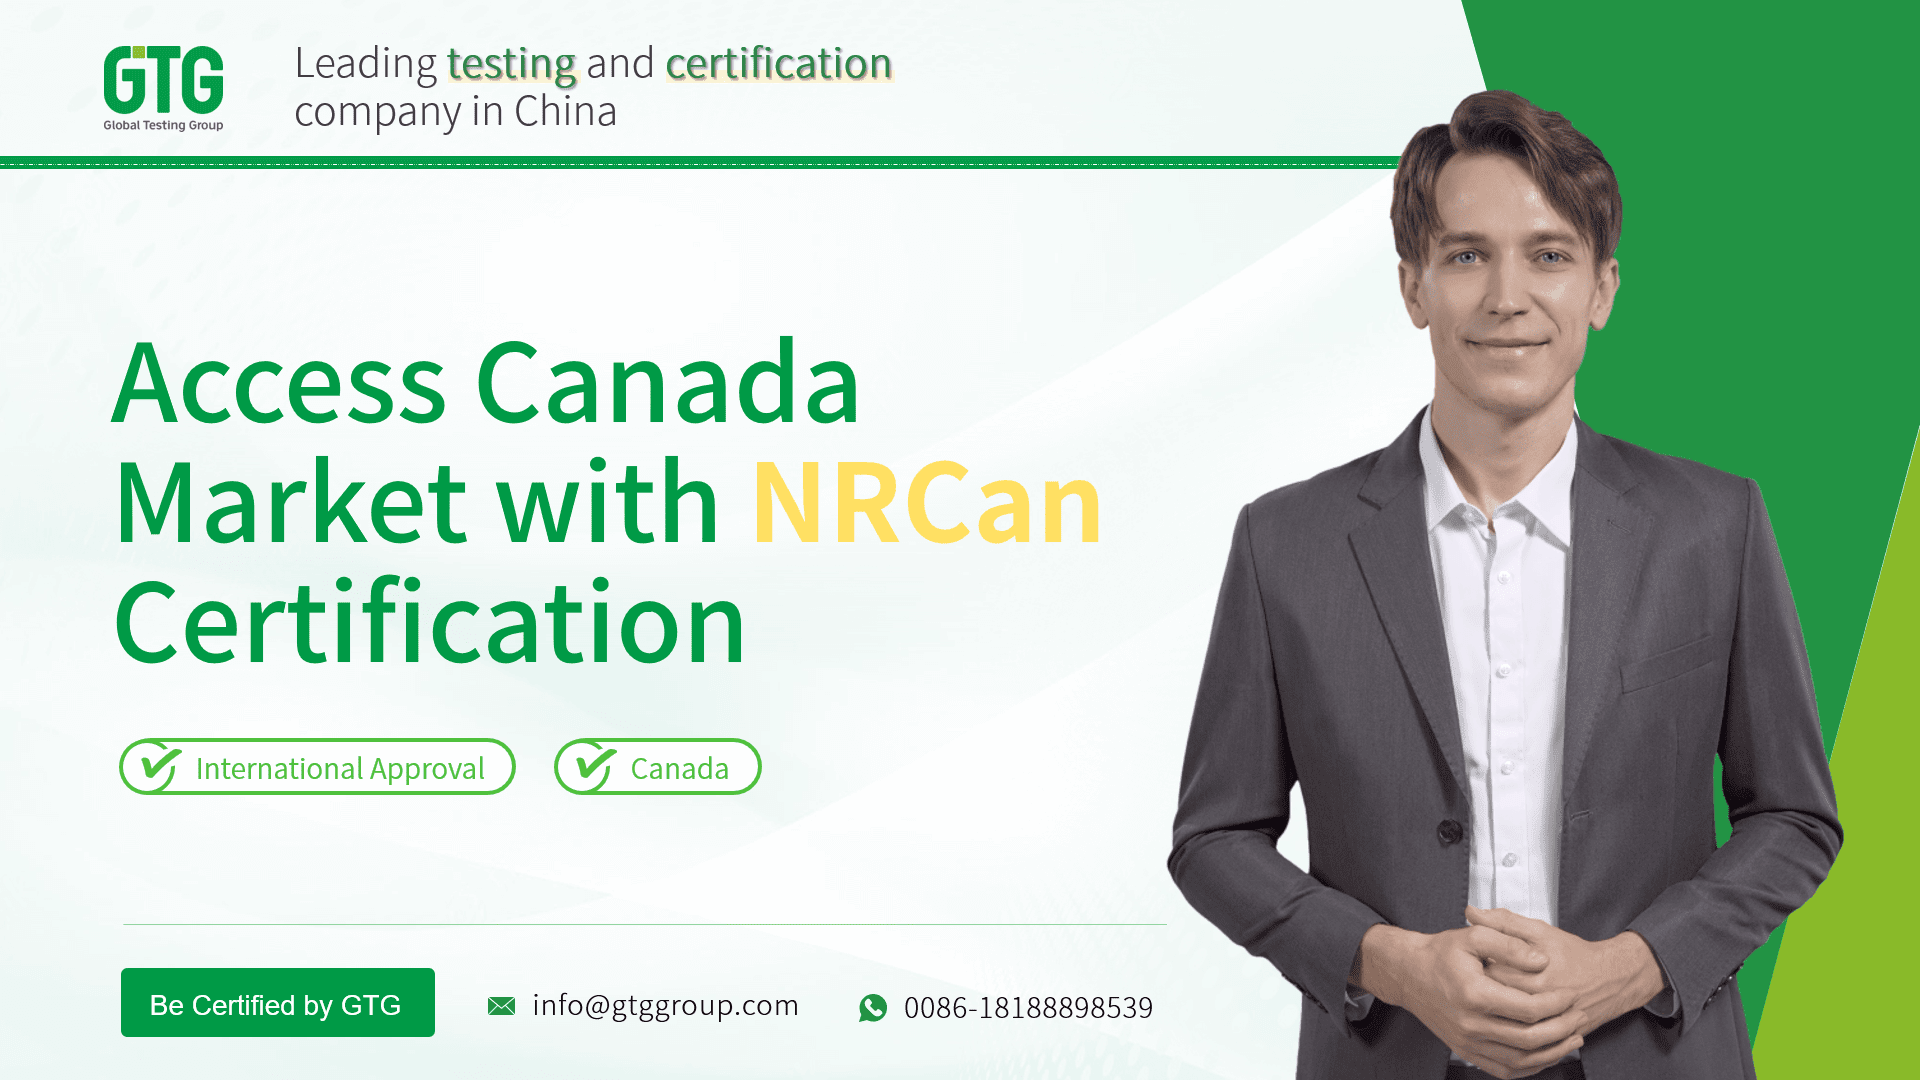 GTG Provides NRCan Canada Certification Recognition Service